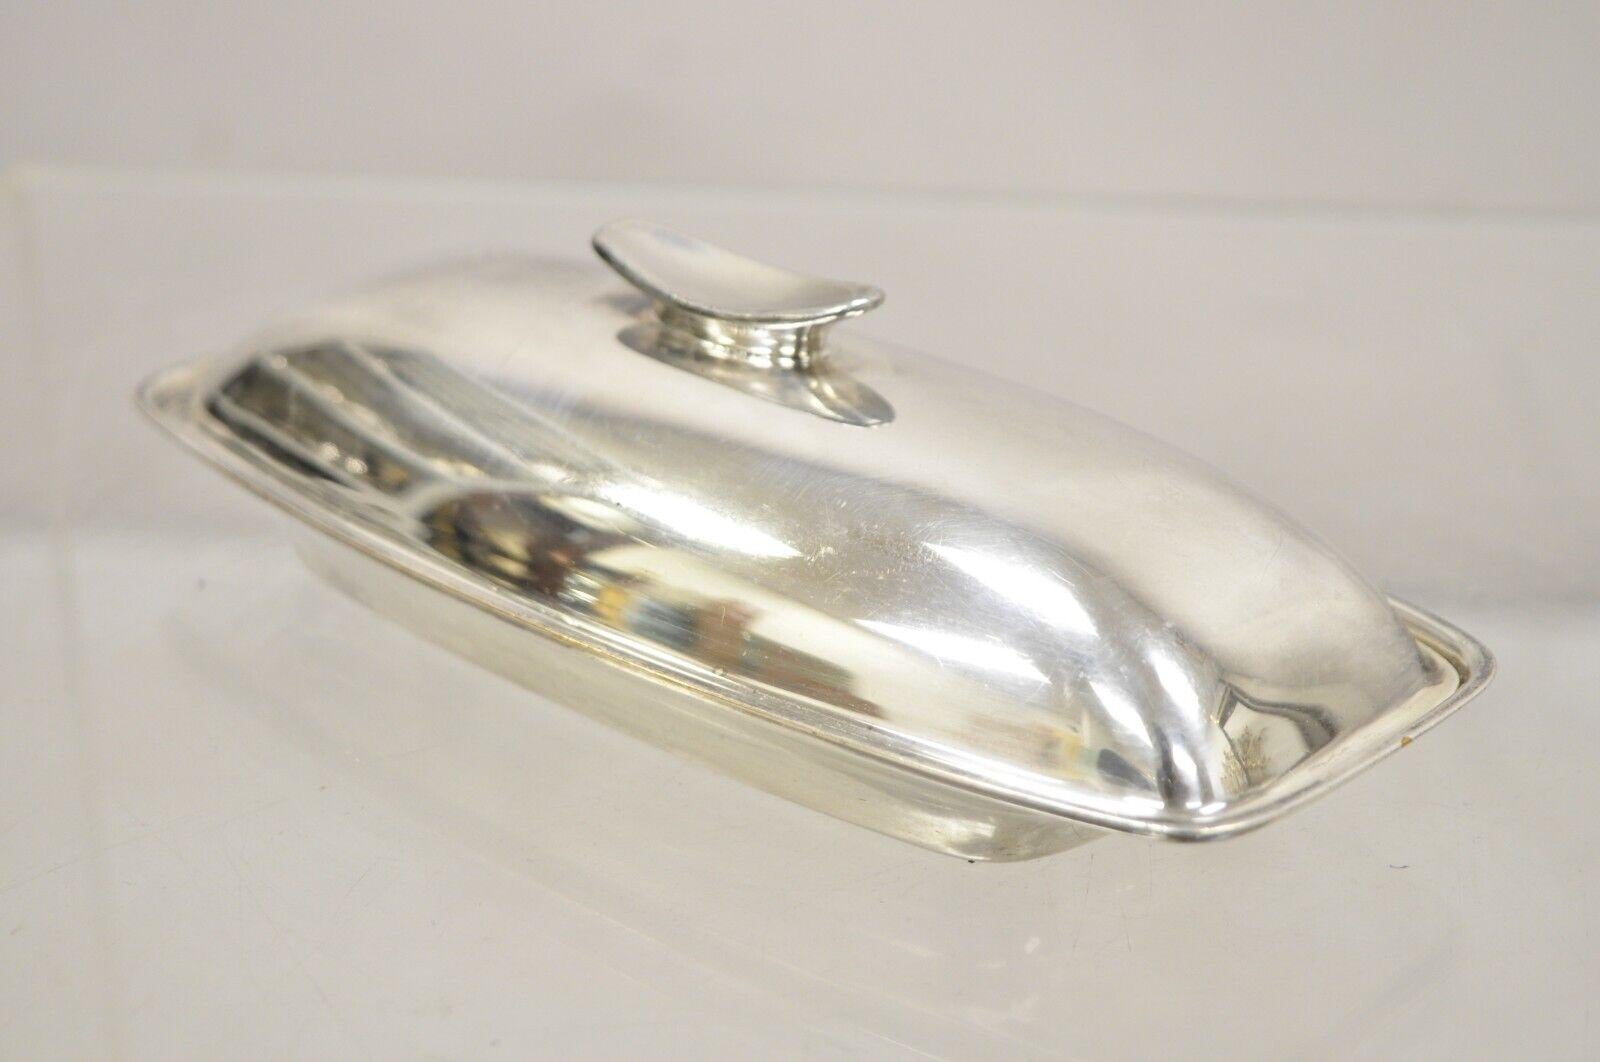 Vintage Gorham YC 775 Silver Plated Modern Butter Dish with Glass Liner. Circa Mid 20th Century. Measurements:  2.5